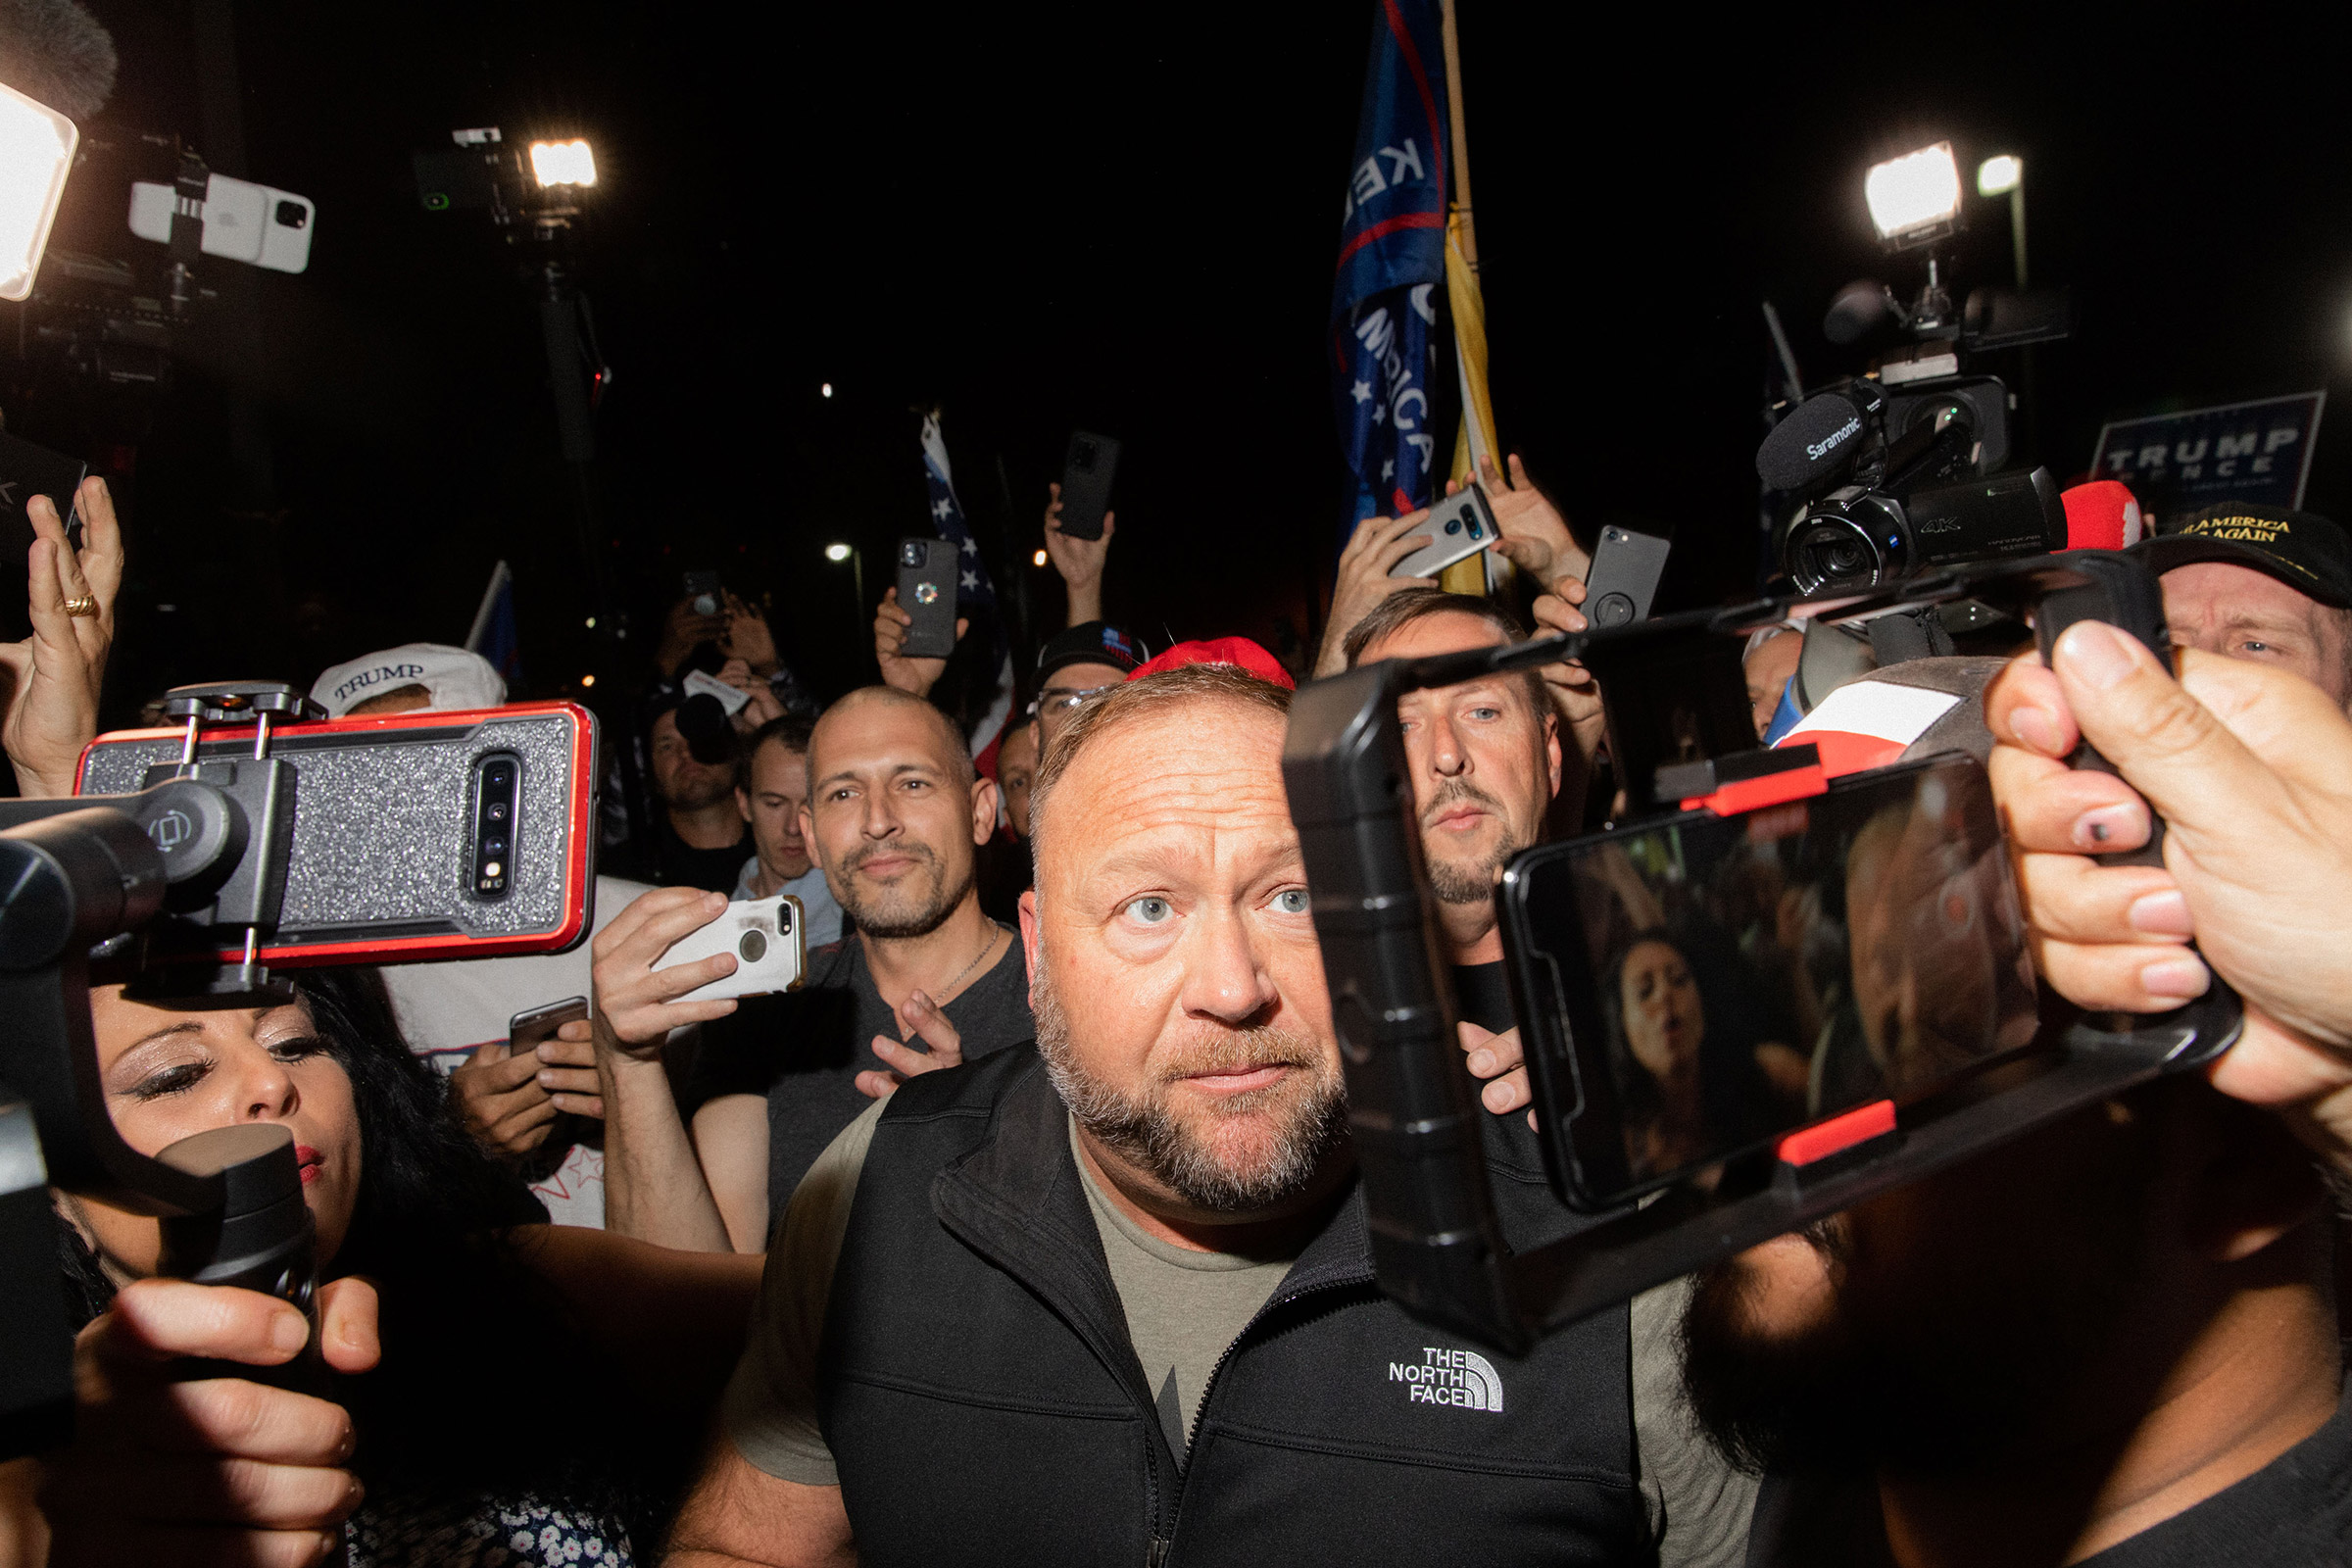 Alex Jones is mobbed at the Maricopa County Elections Office in Phoenix, AZ on November 5, 2020